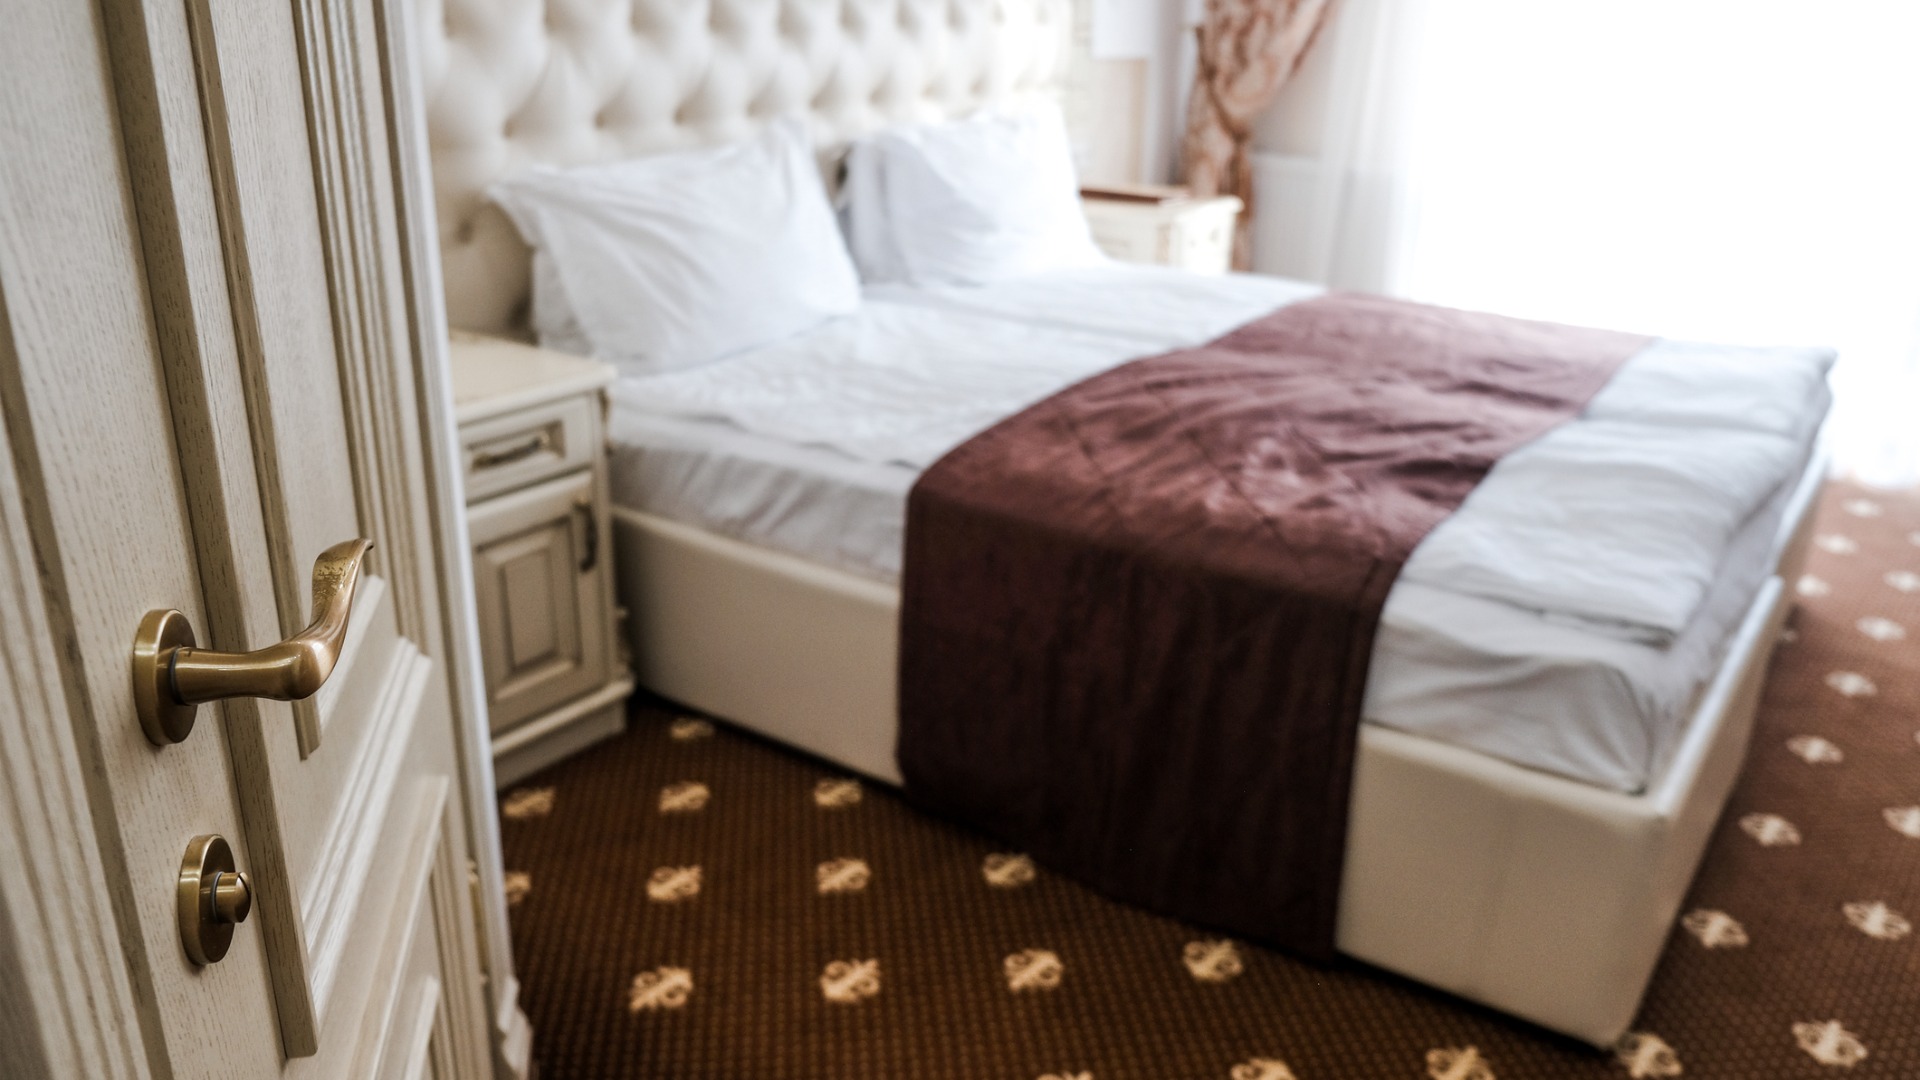 This image shows a hotel room with an old-fashioned bed and bedside table. The floor is covered by carpet from wall to wall. 